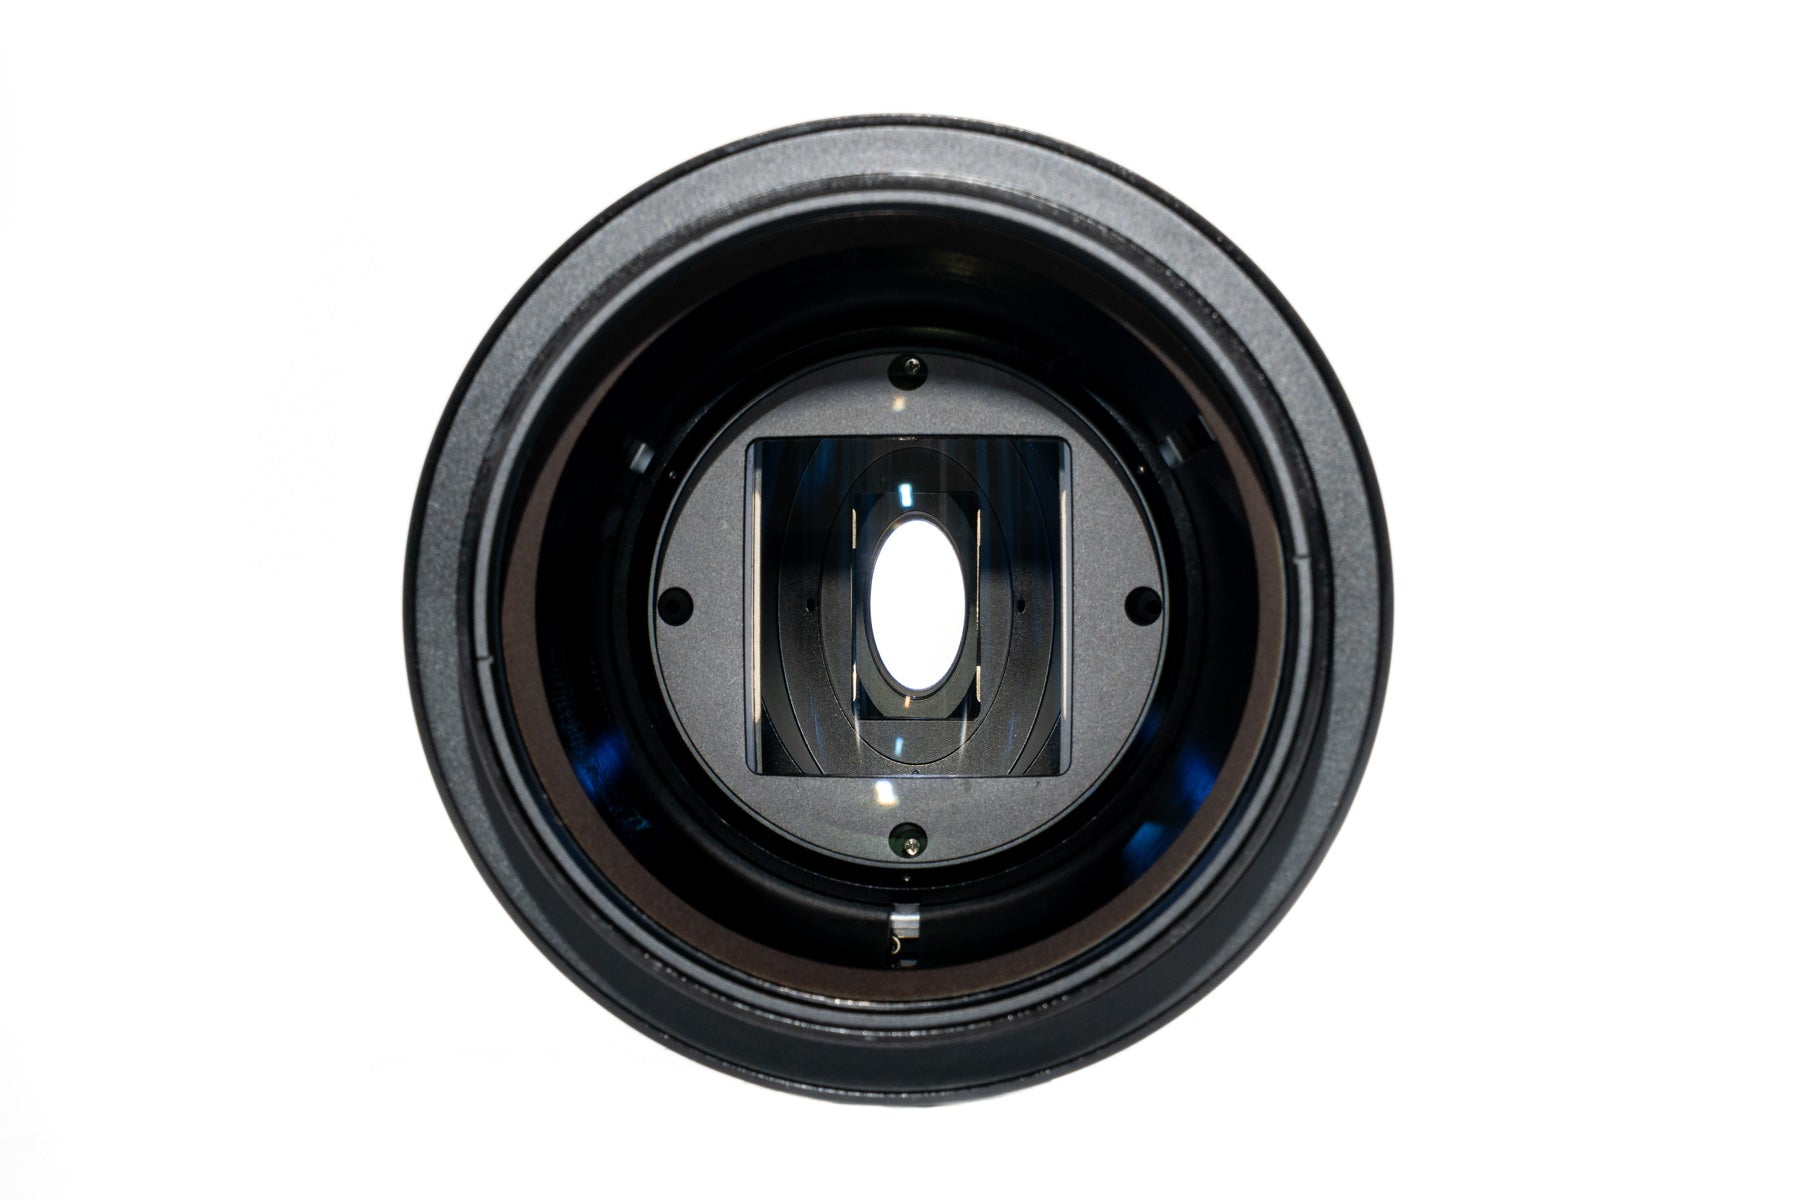 Vazen 40mm T/2 1.8X Anamorphic Lens for MFT Camera in a Front View